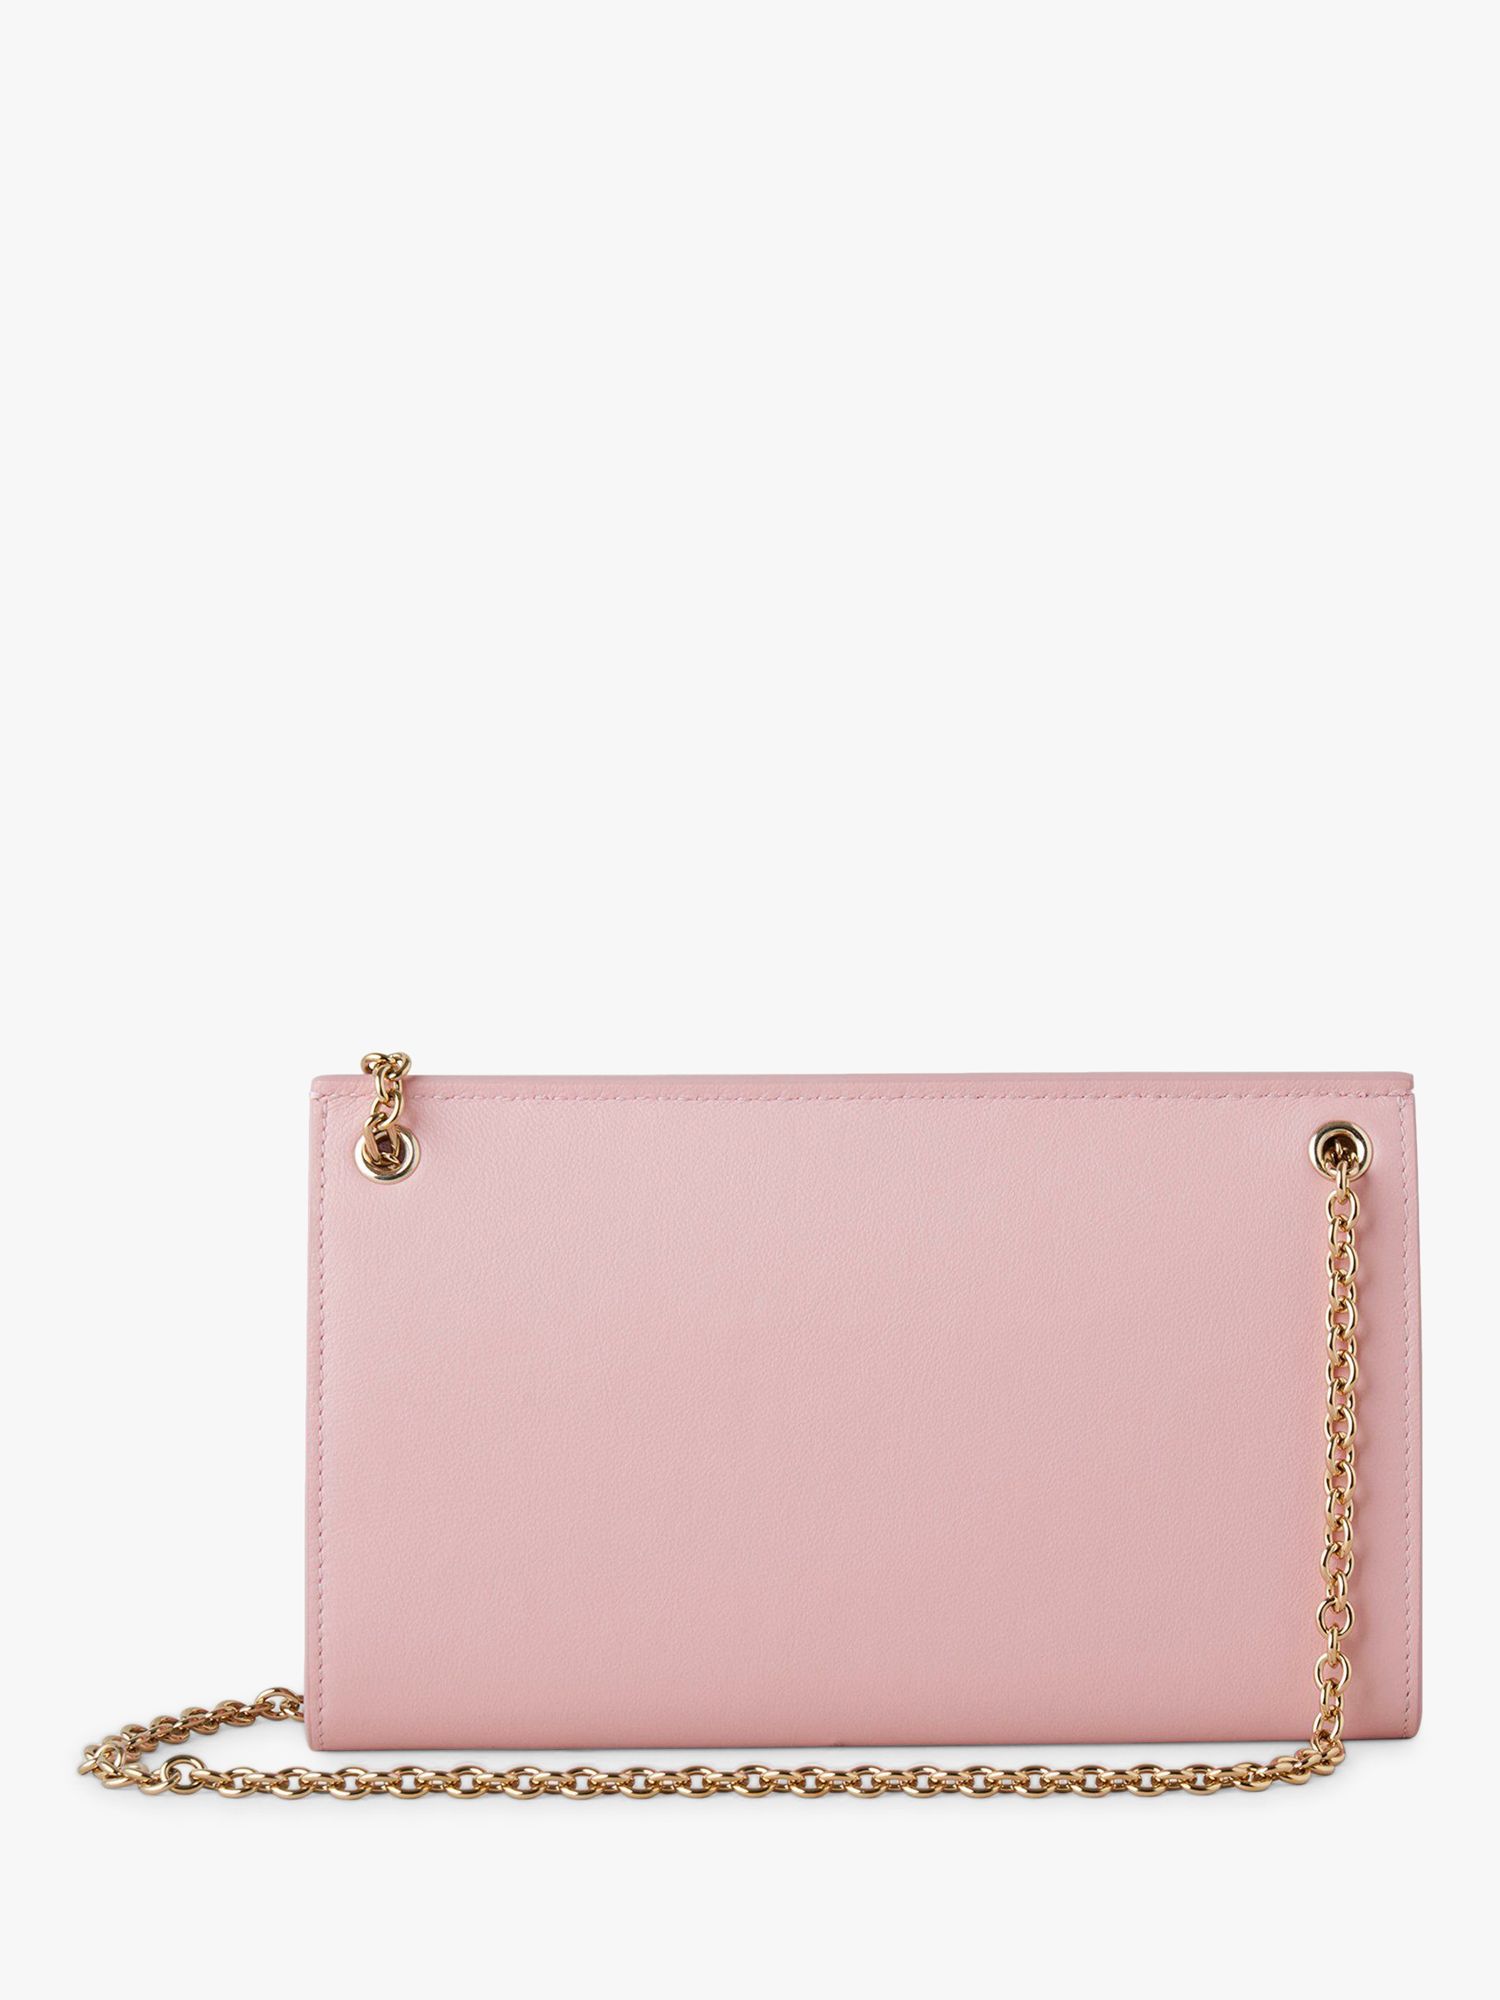 Mulberry Amberley Micro Classic Grain Leather Clutch Bag, Powder Rose ...